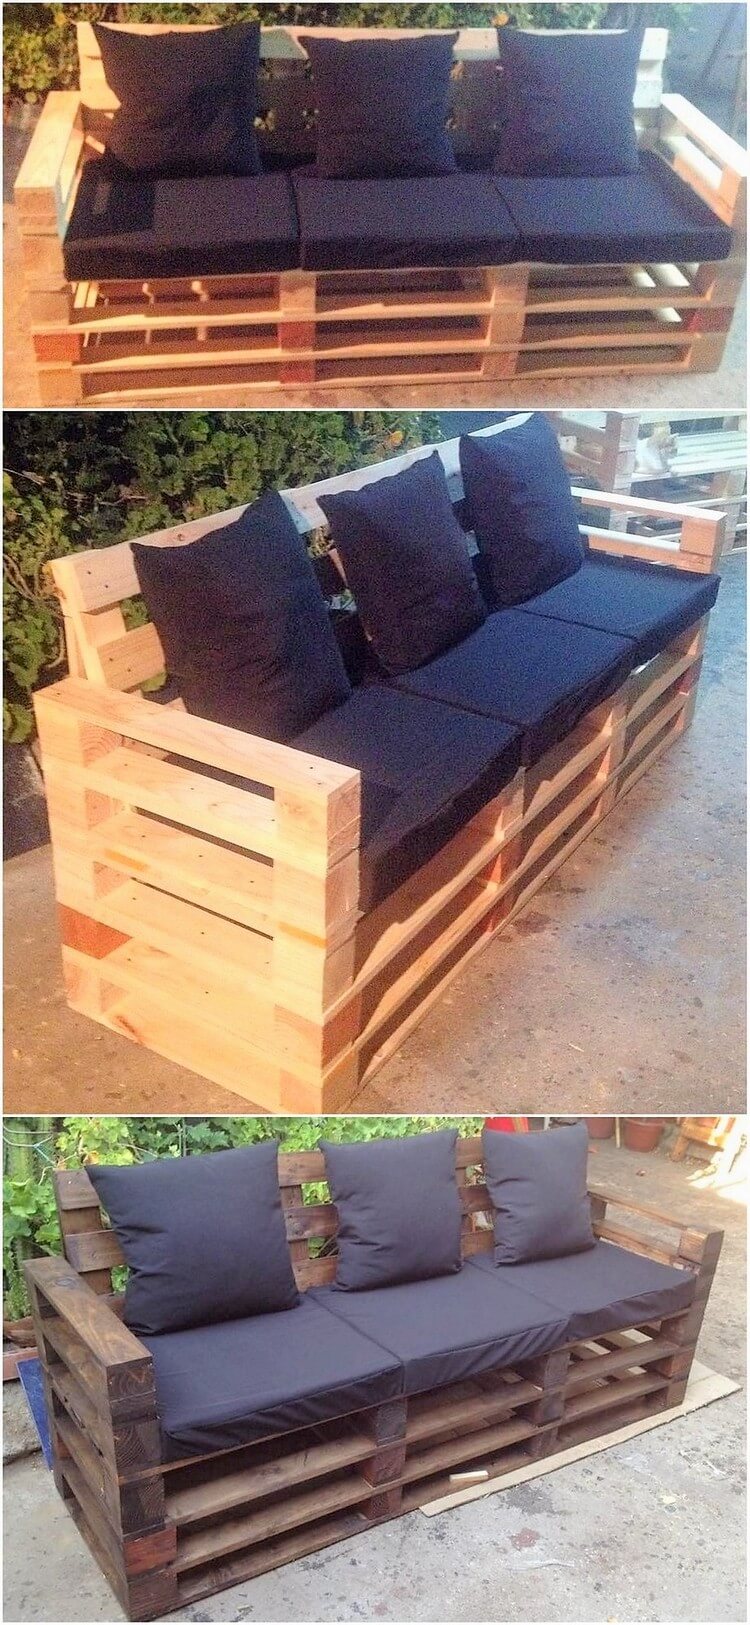 Pallet Bench or Couch